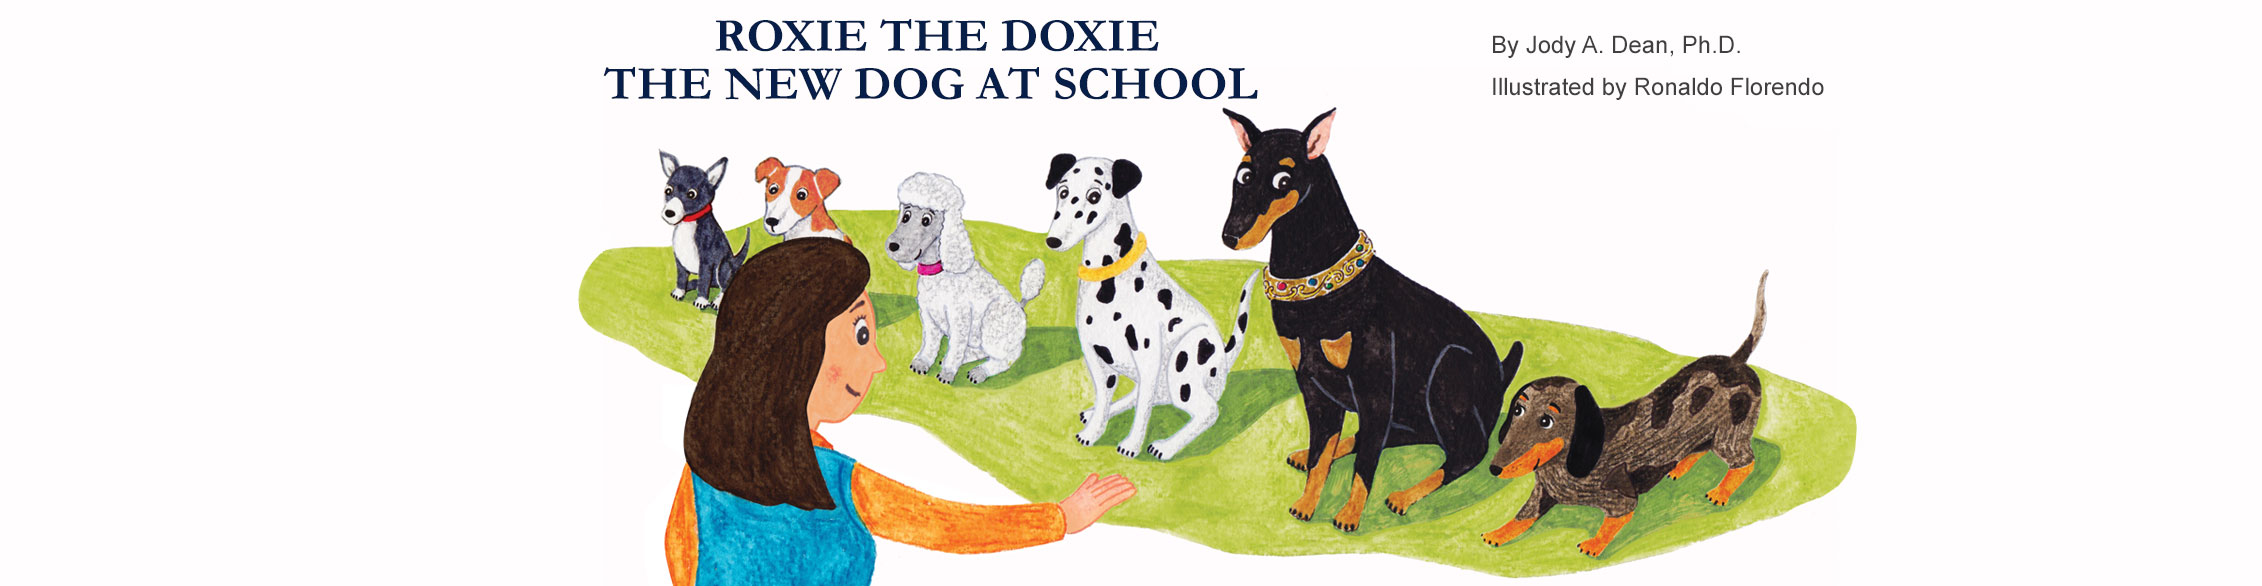 Roxie the Doxie The New Dog at School